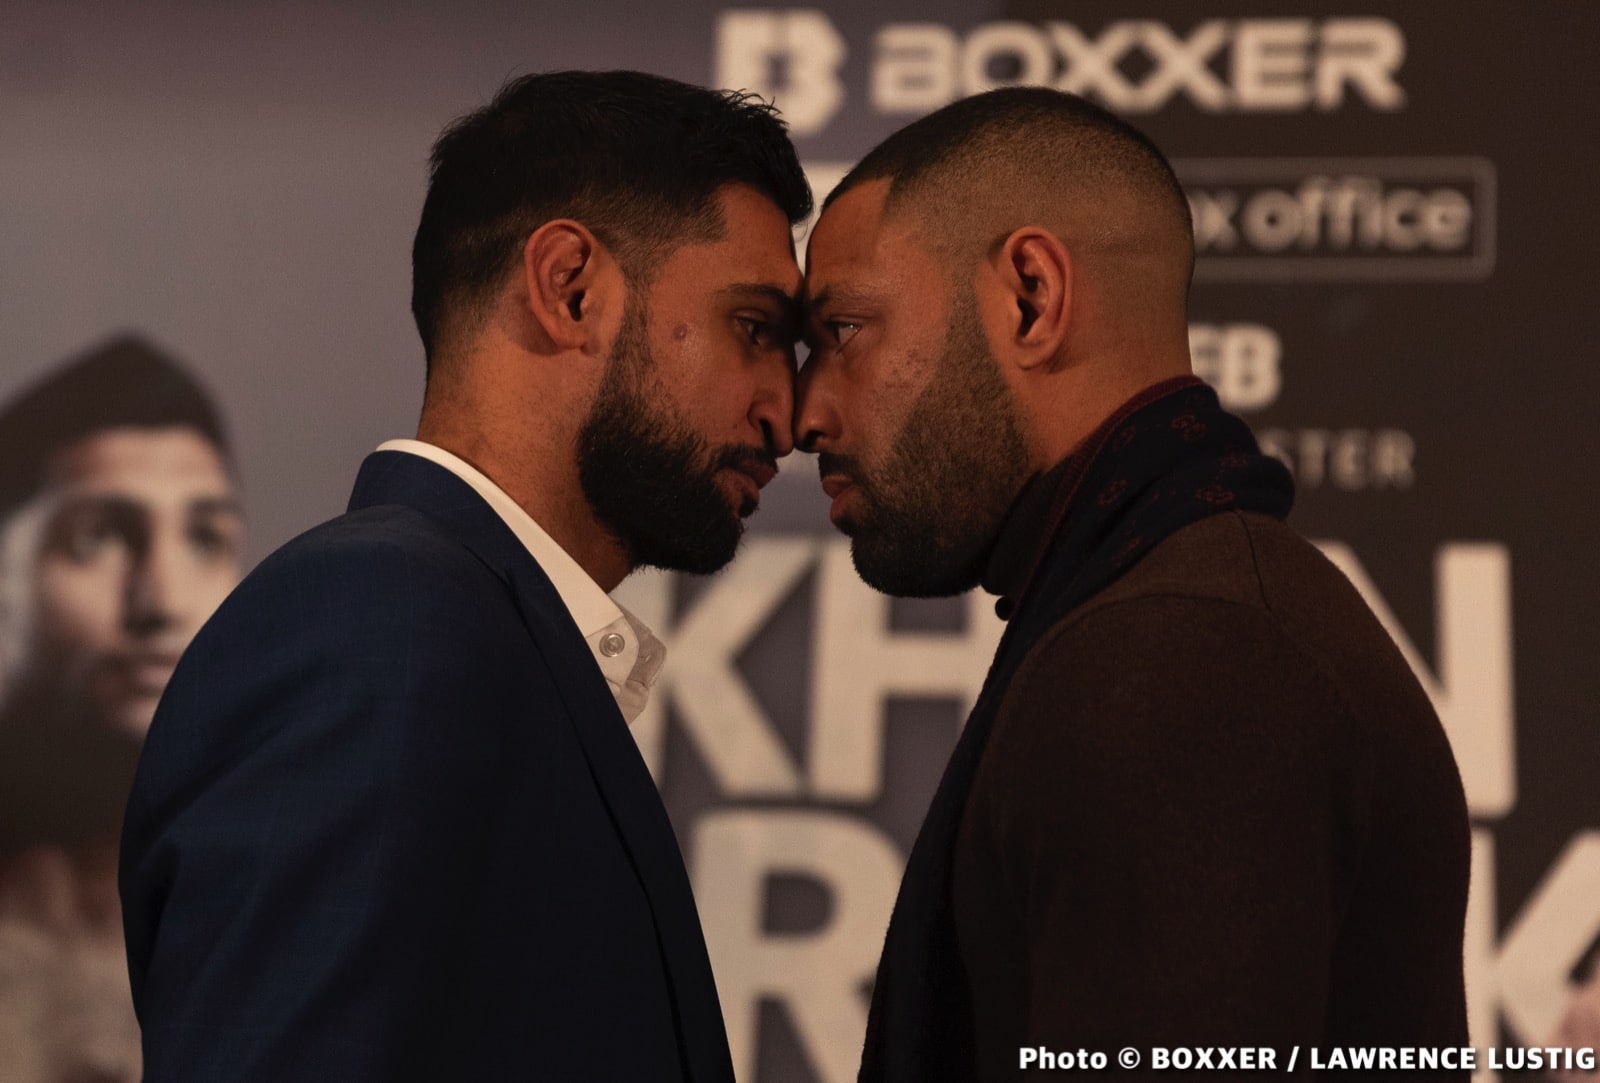 Image: Amir Khan vs. Kell Brook on Feb.19th in Manchester, England